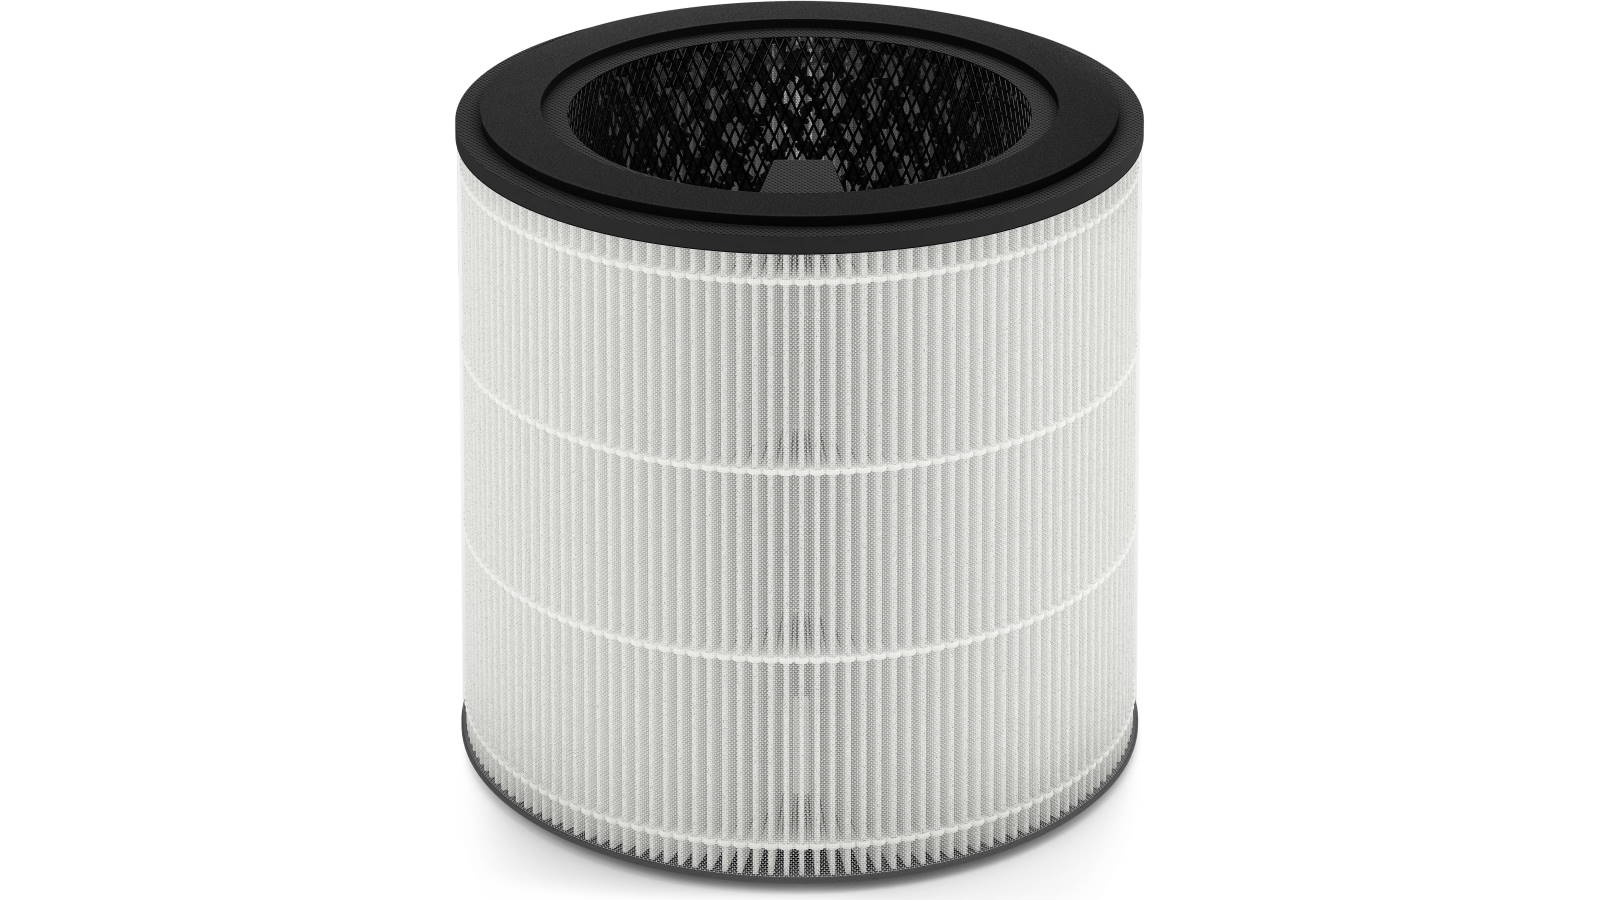 FY6172 FY6171 HEPA Carbon Filter for Philips Purifier Series 6000